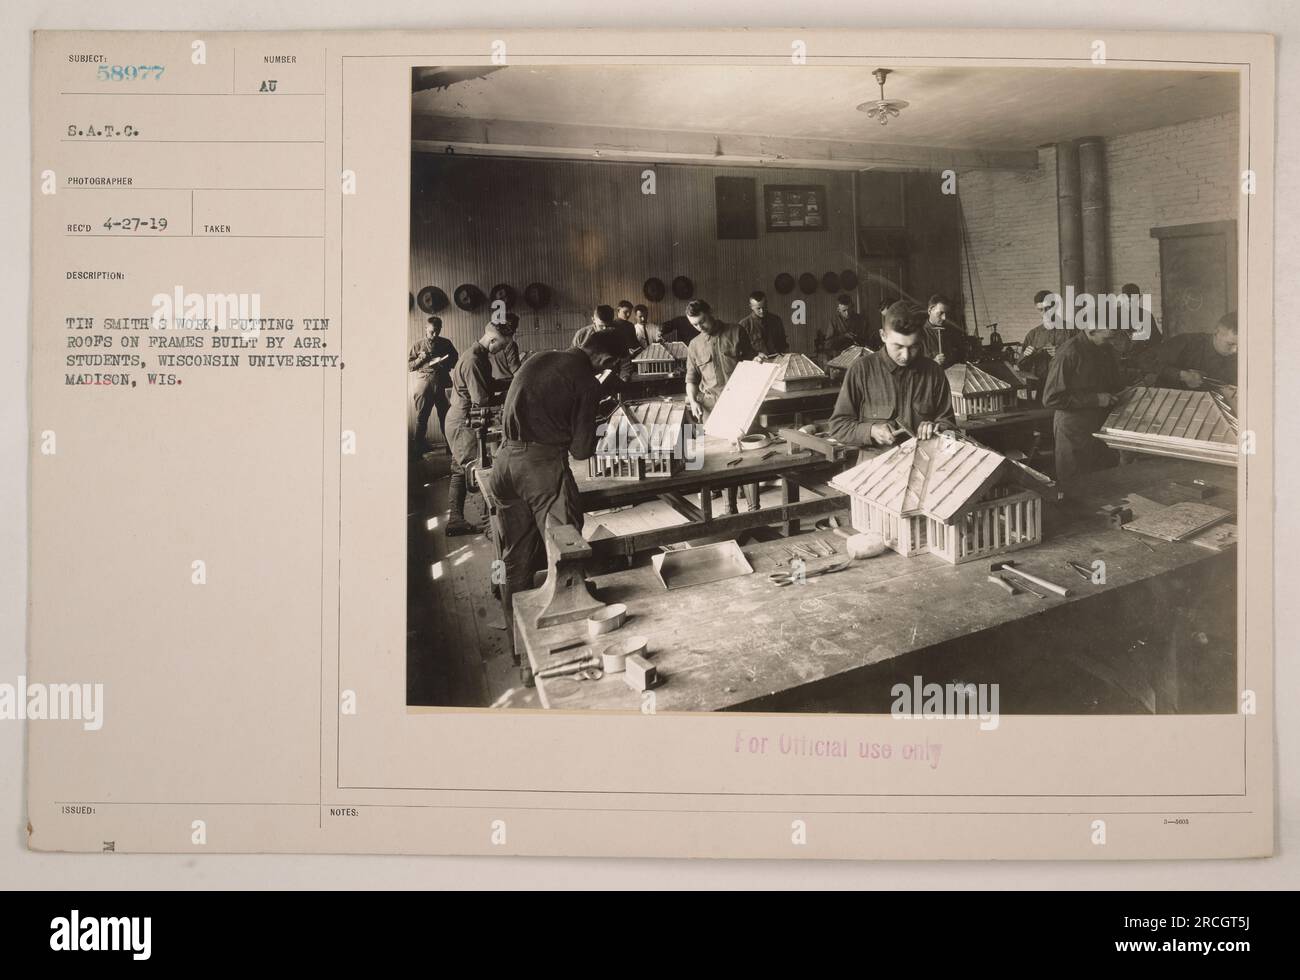 A group of agricultural students from the University of Wisconsin, Madison, are pictured working alongside a tin smith. They are seen putting tin roofs on frames they have built themselves. The photograph is part of a series documenting American military activities during World War I. Stock Photo